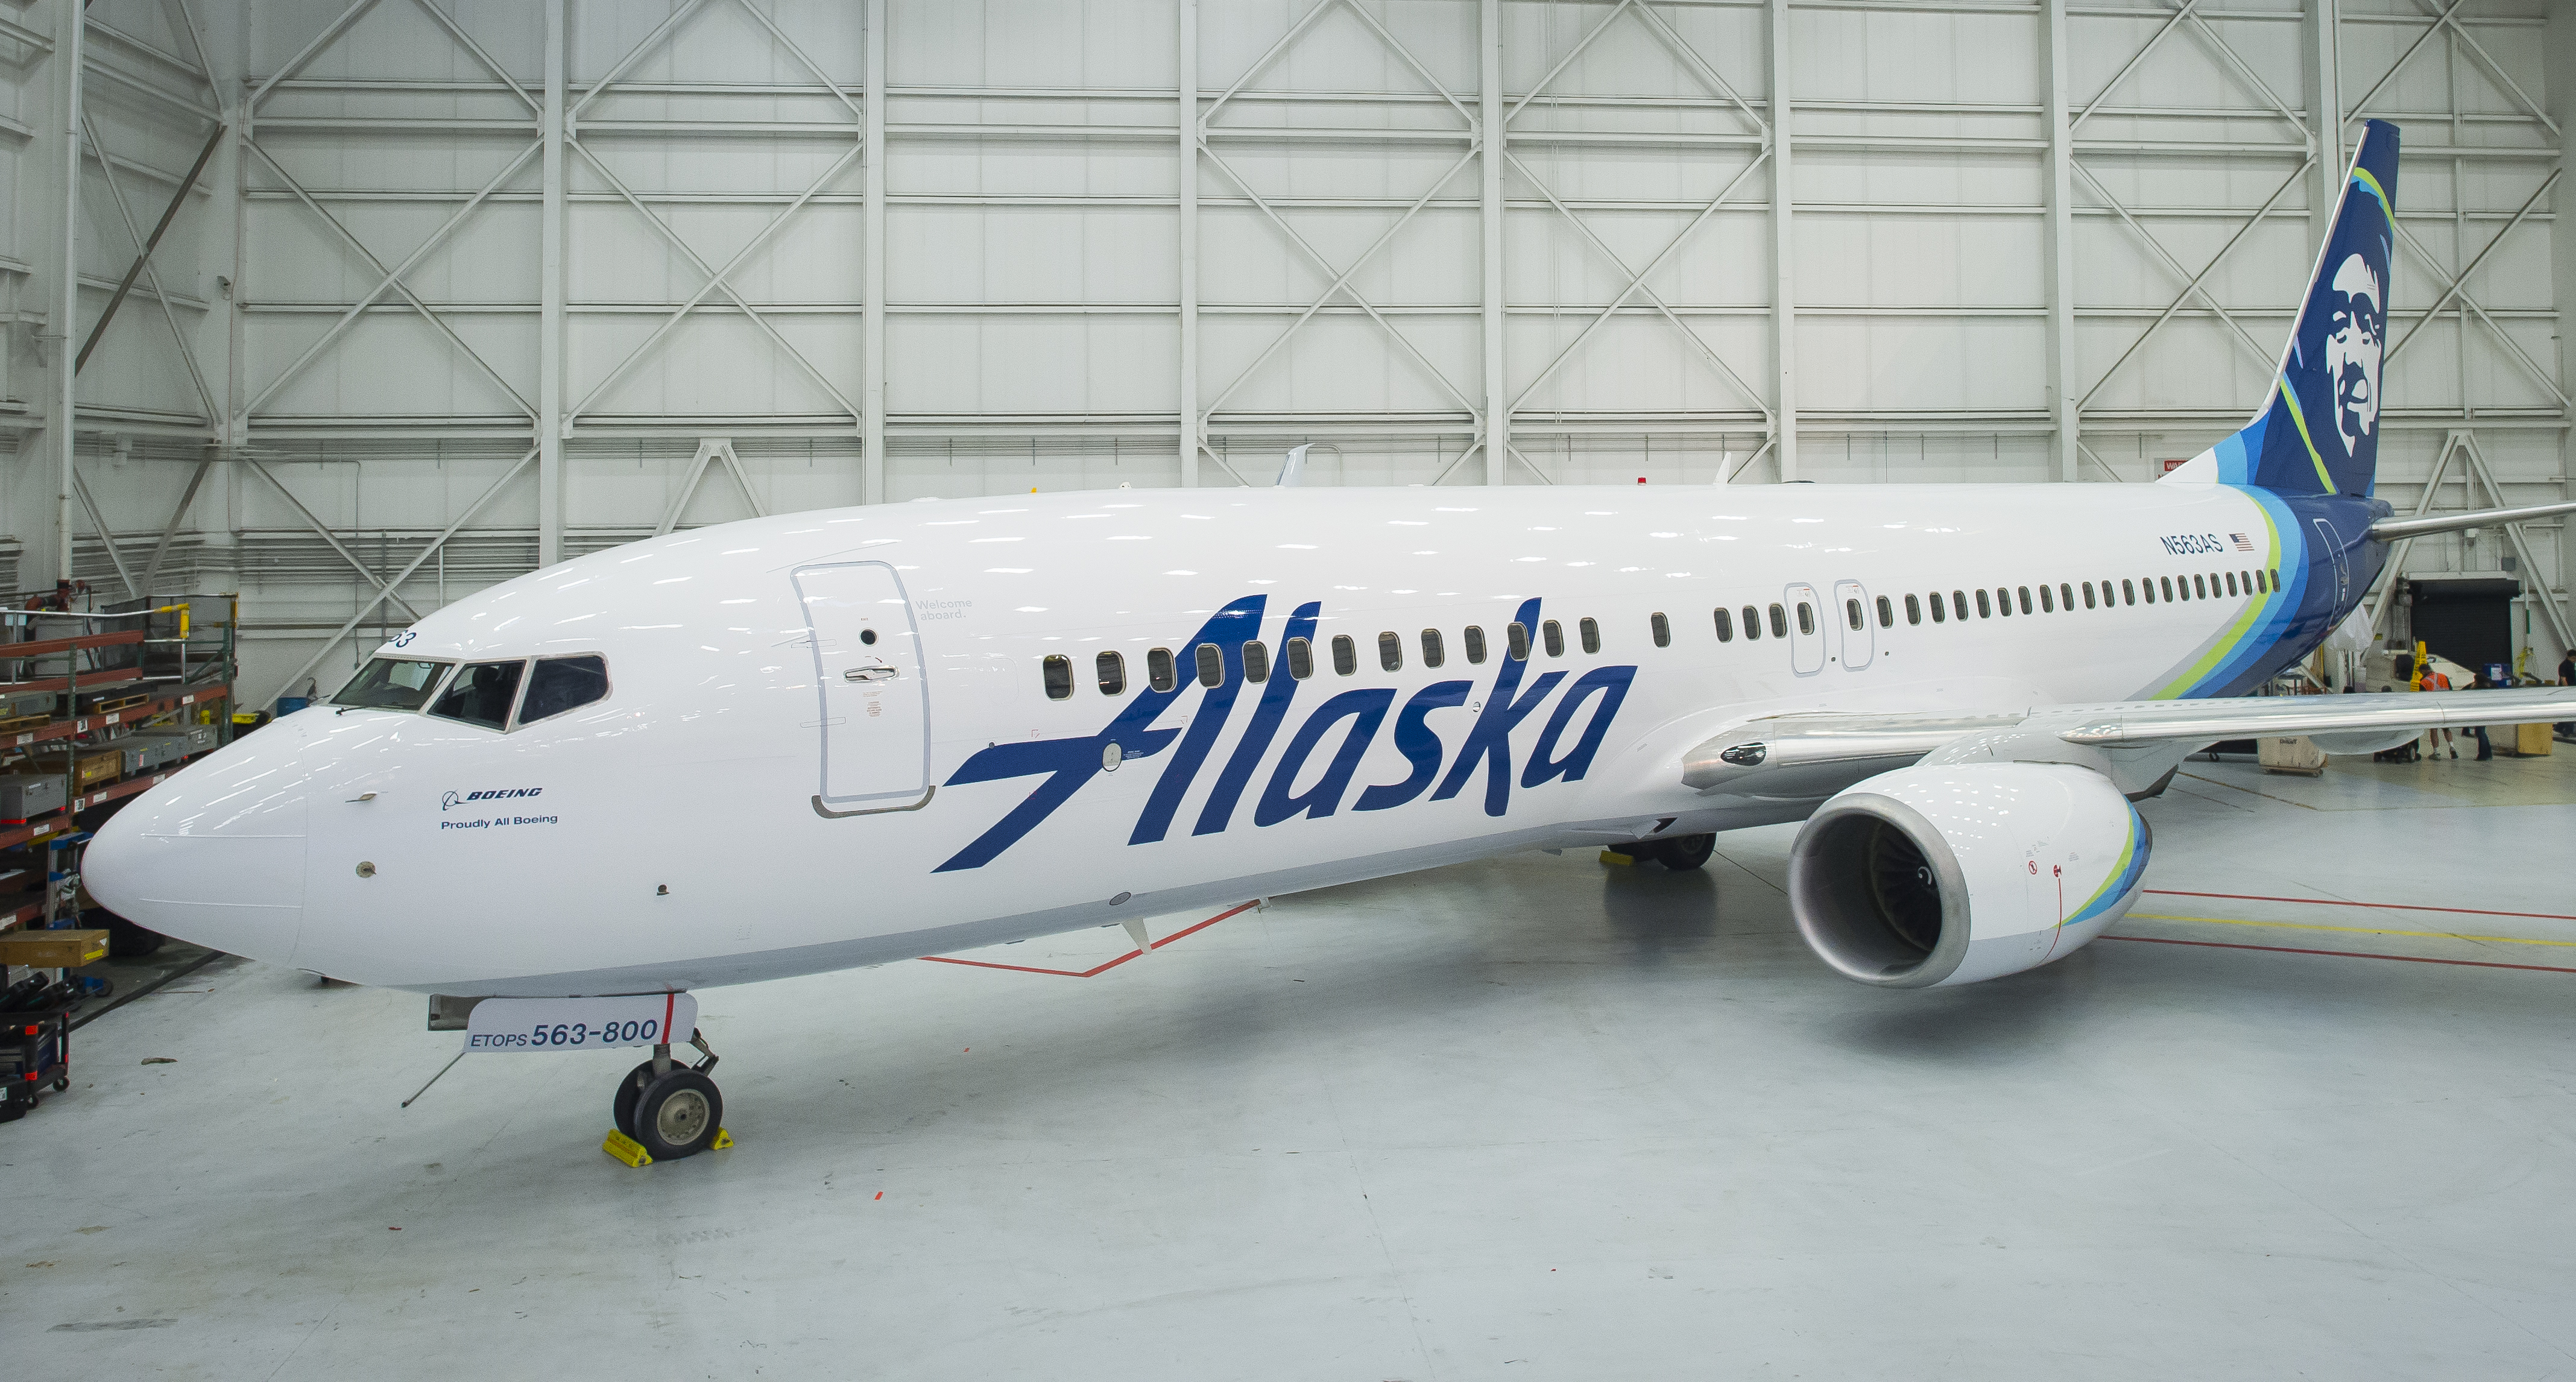 Alaska Airlines Boeing 737-800 new livery 2016